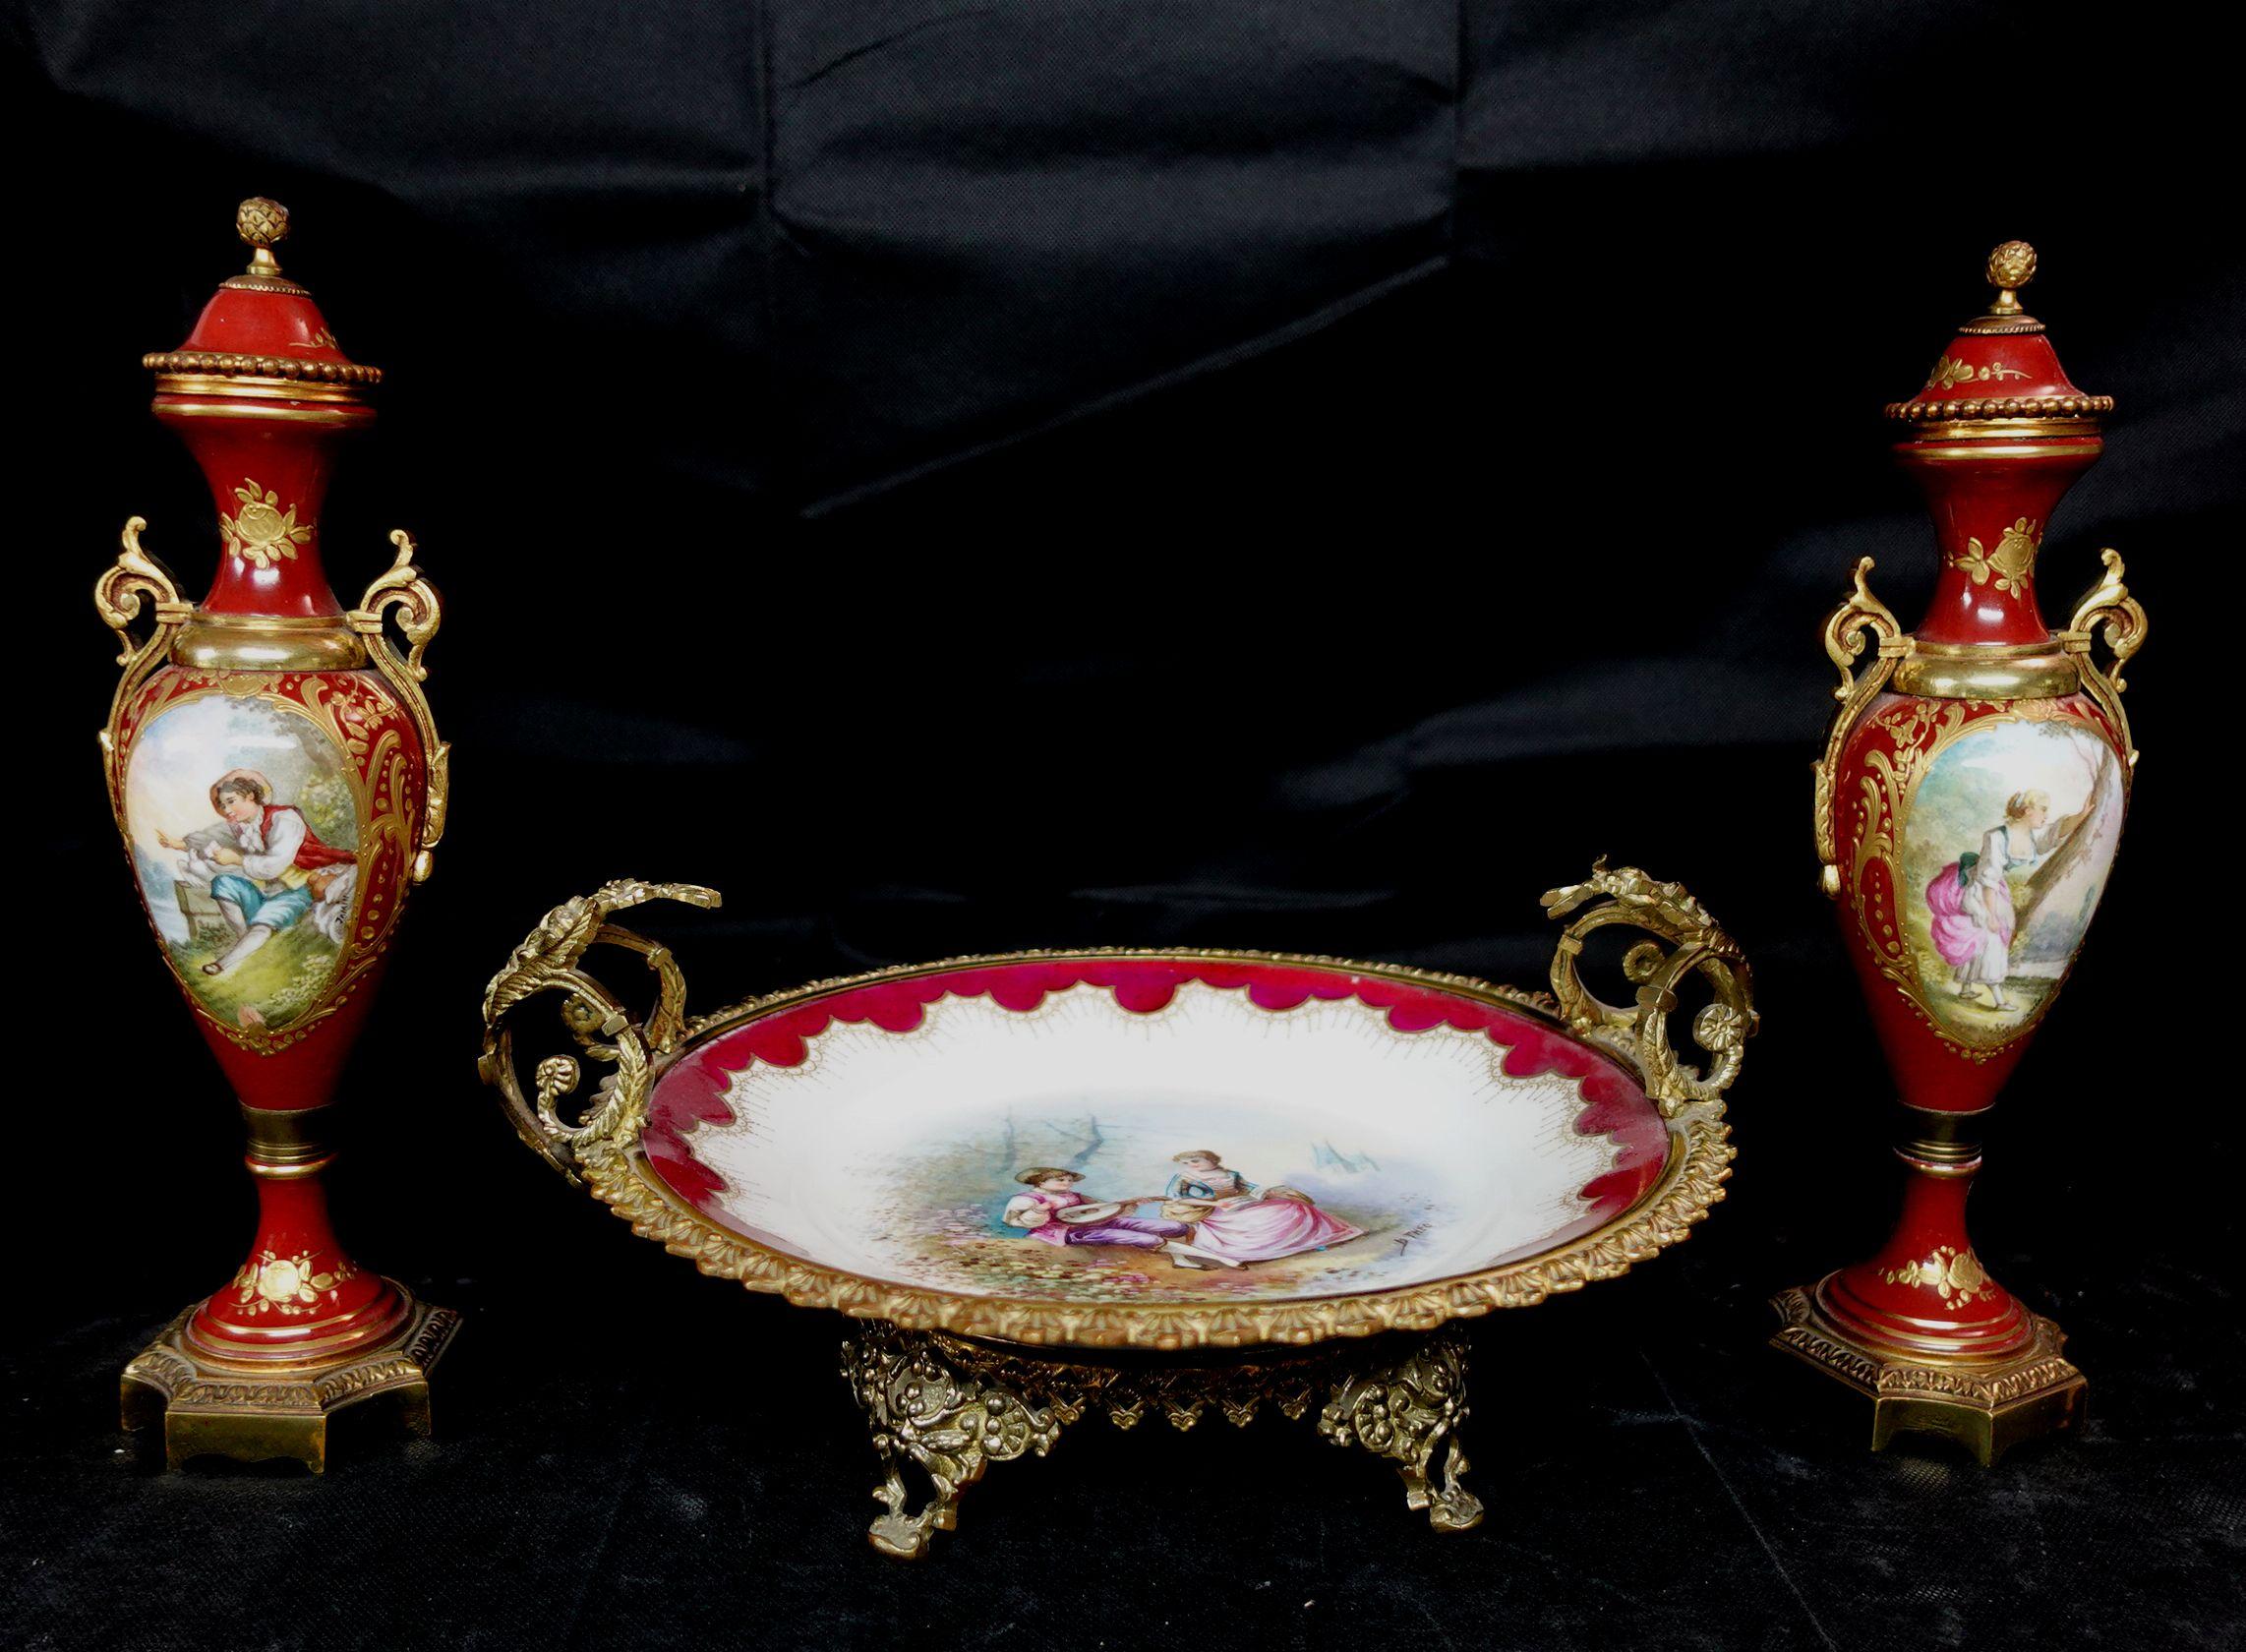 Antique French Ormolu Sevres style Garniture, 19th Century, Signature and Mark, Comprising an assembled garniture set consisting of two bolted urns with hand-painted scenes of lovers in a landscape, artist signed Jamin. Together with an